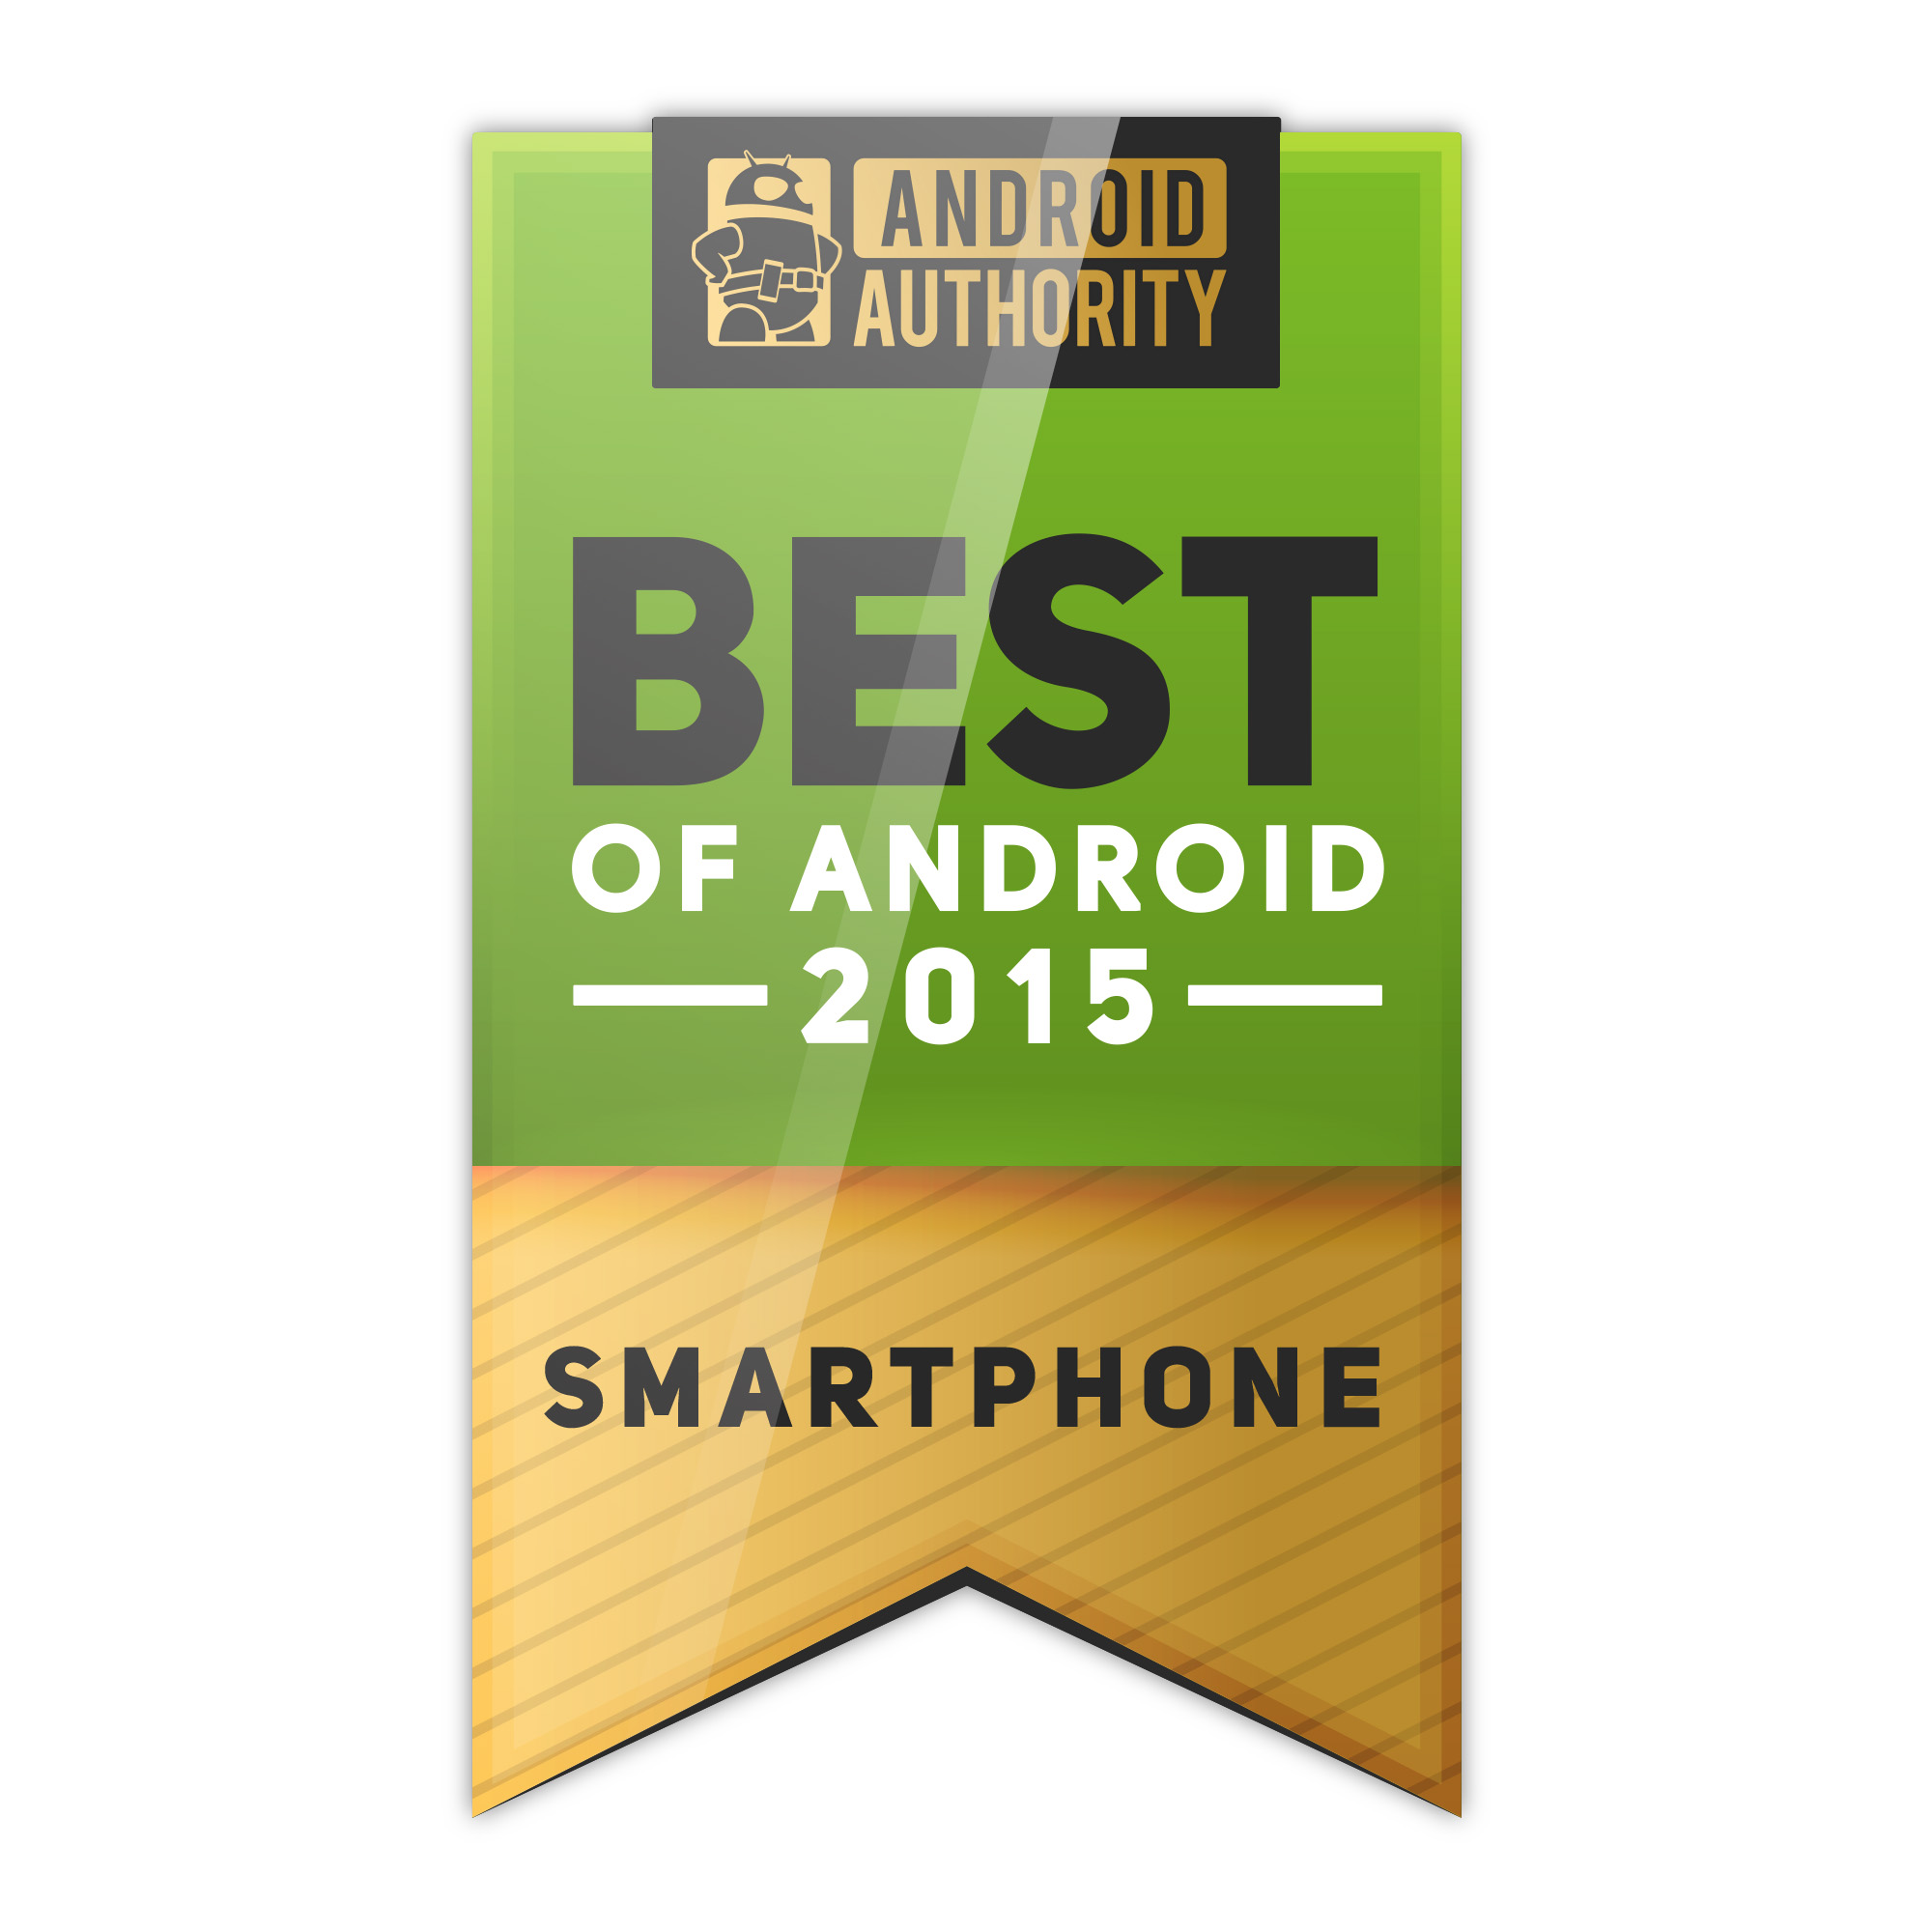 best of android 2015 (1) copy